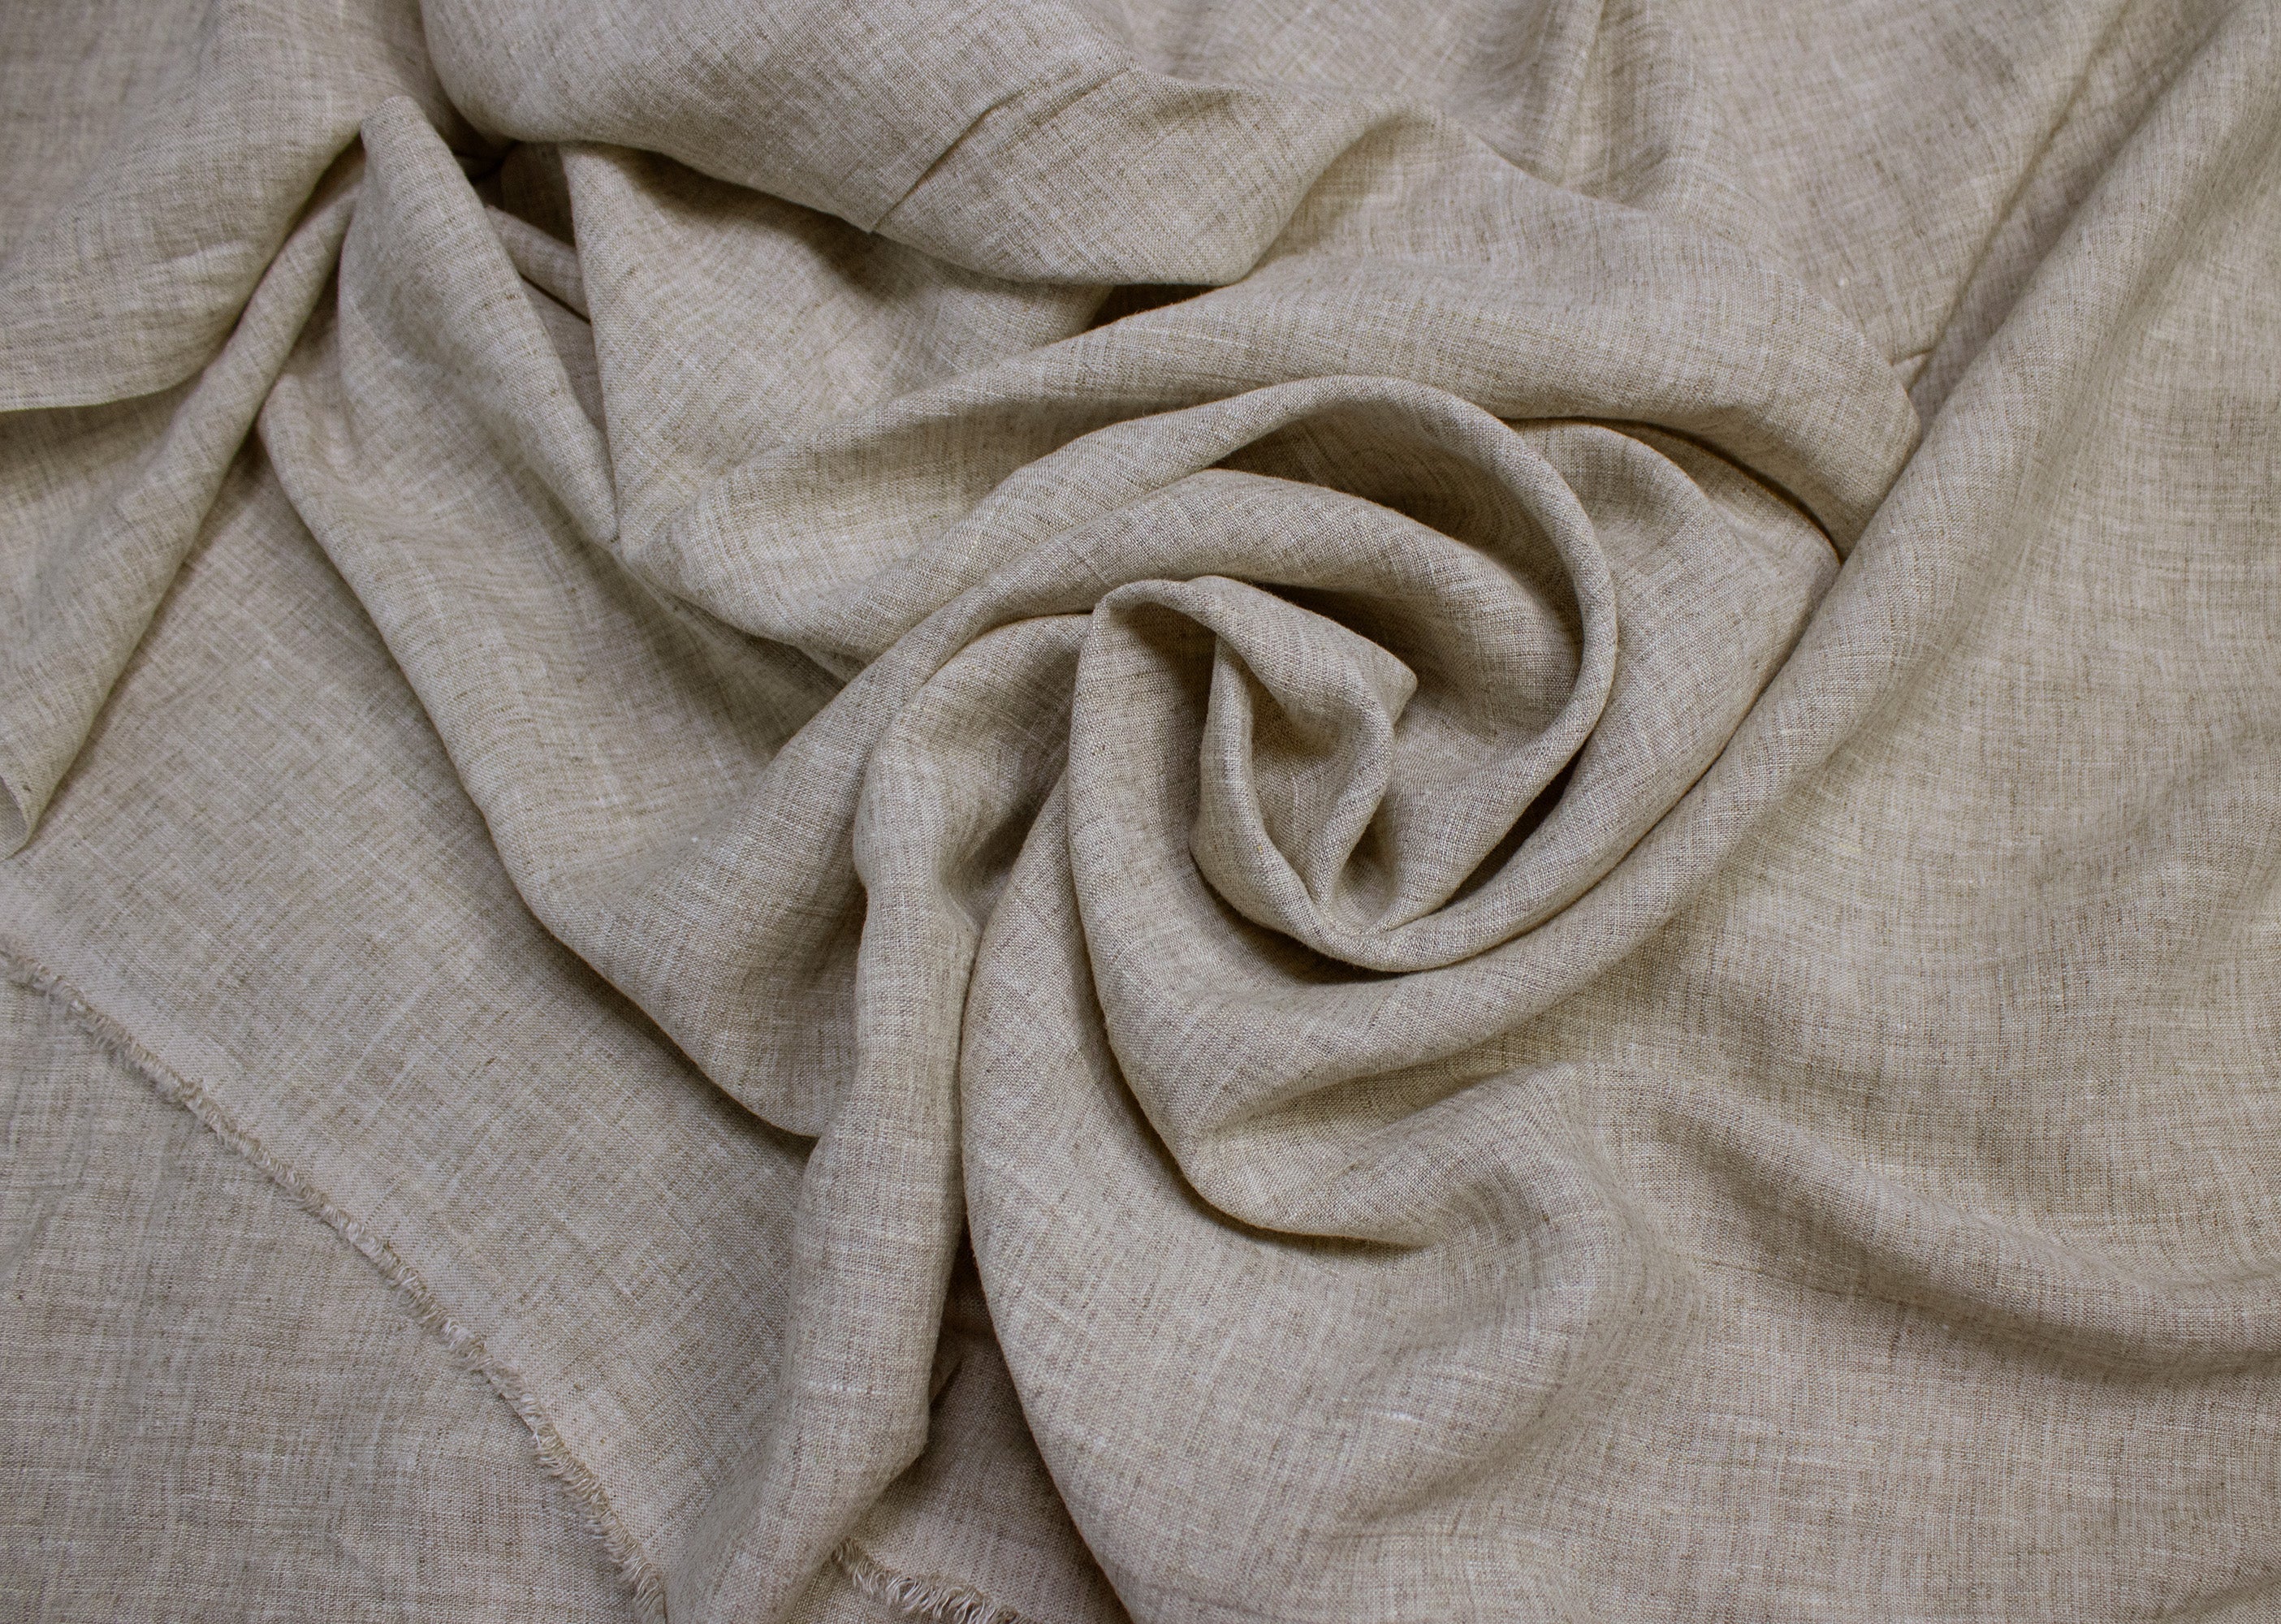 Luca-S Pure Natural Linen Wrinkled Fabric Light Grey Color